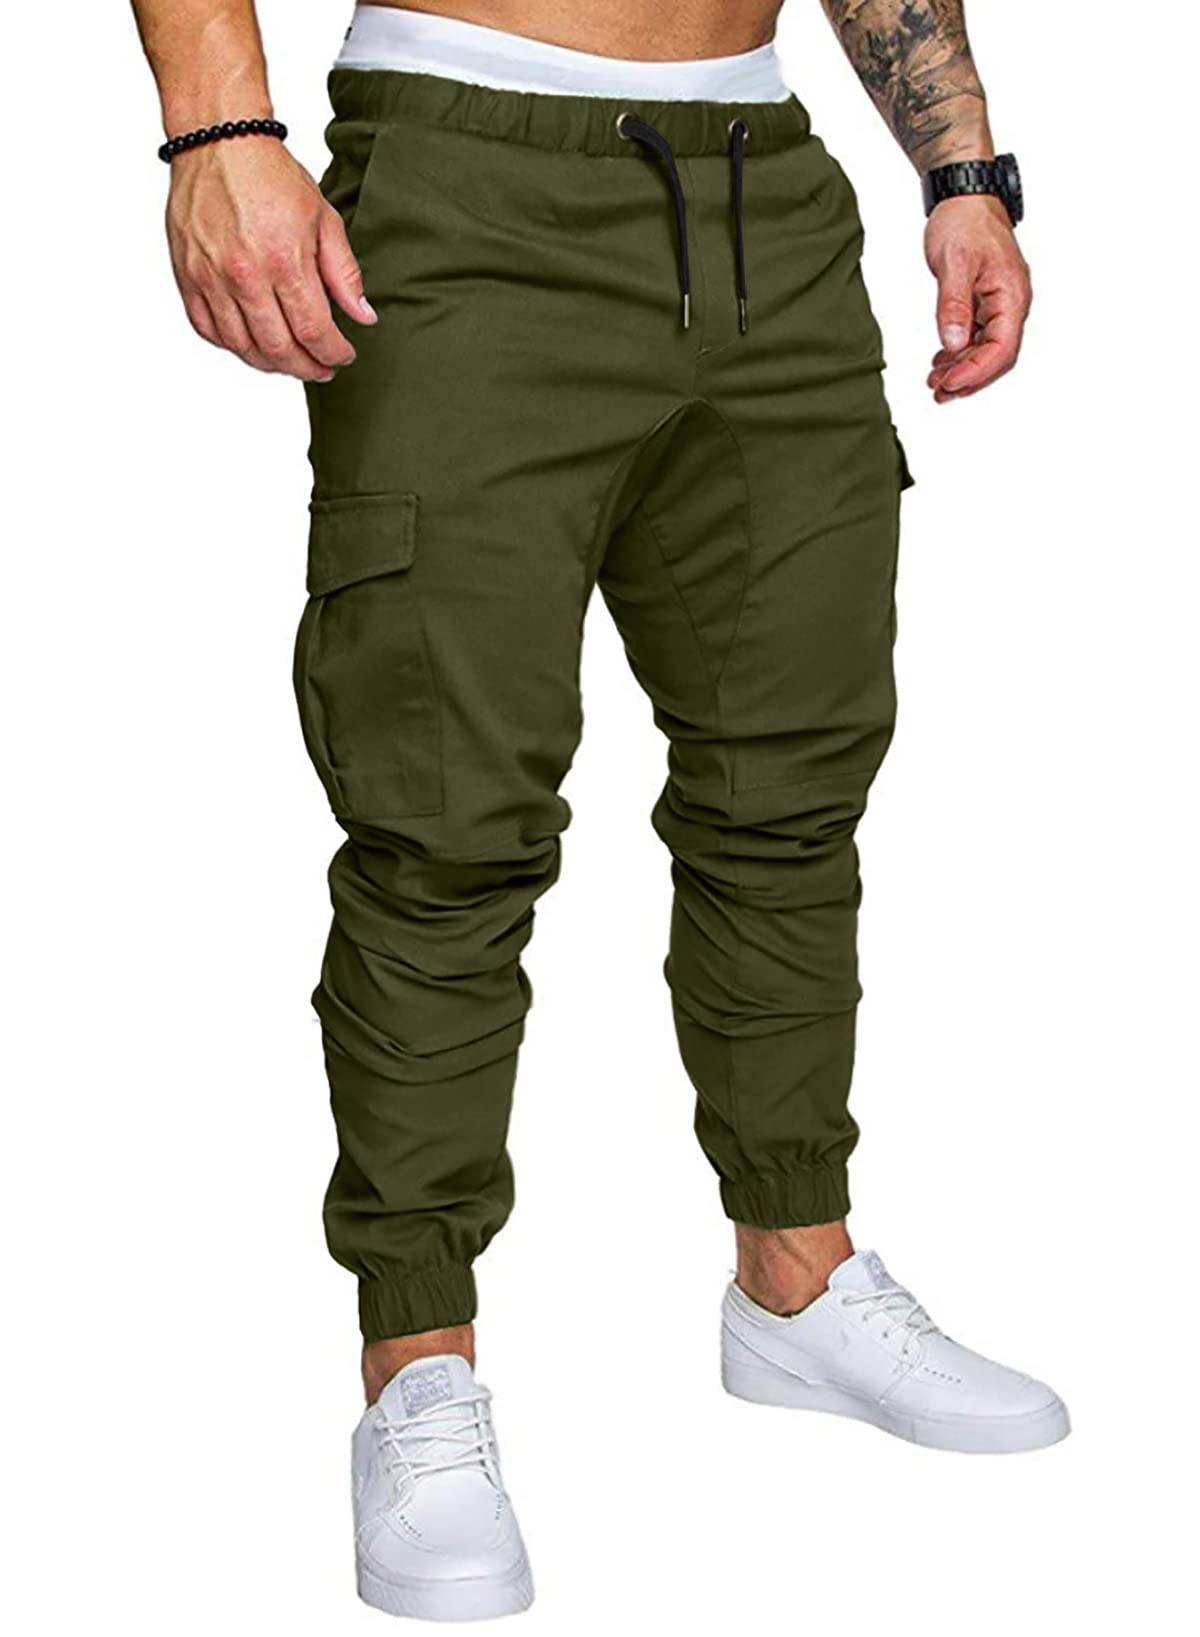 JMIERR Mens Fashion Cargo Pants - Casual Cotton Tapered Stretch Twill  Drawstring Athletic Joggers Sweatpants with 6 Pockets Medium A Green 1